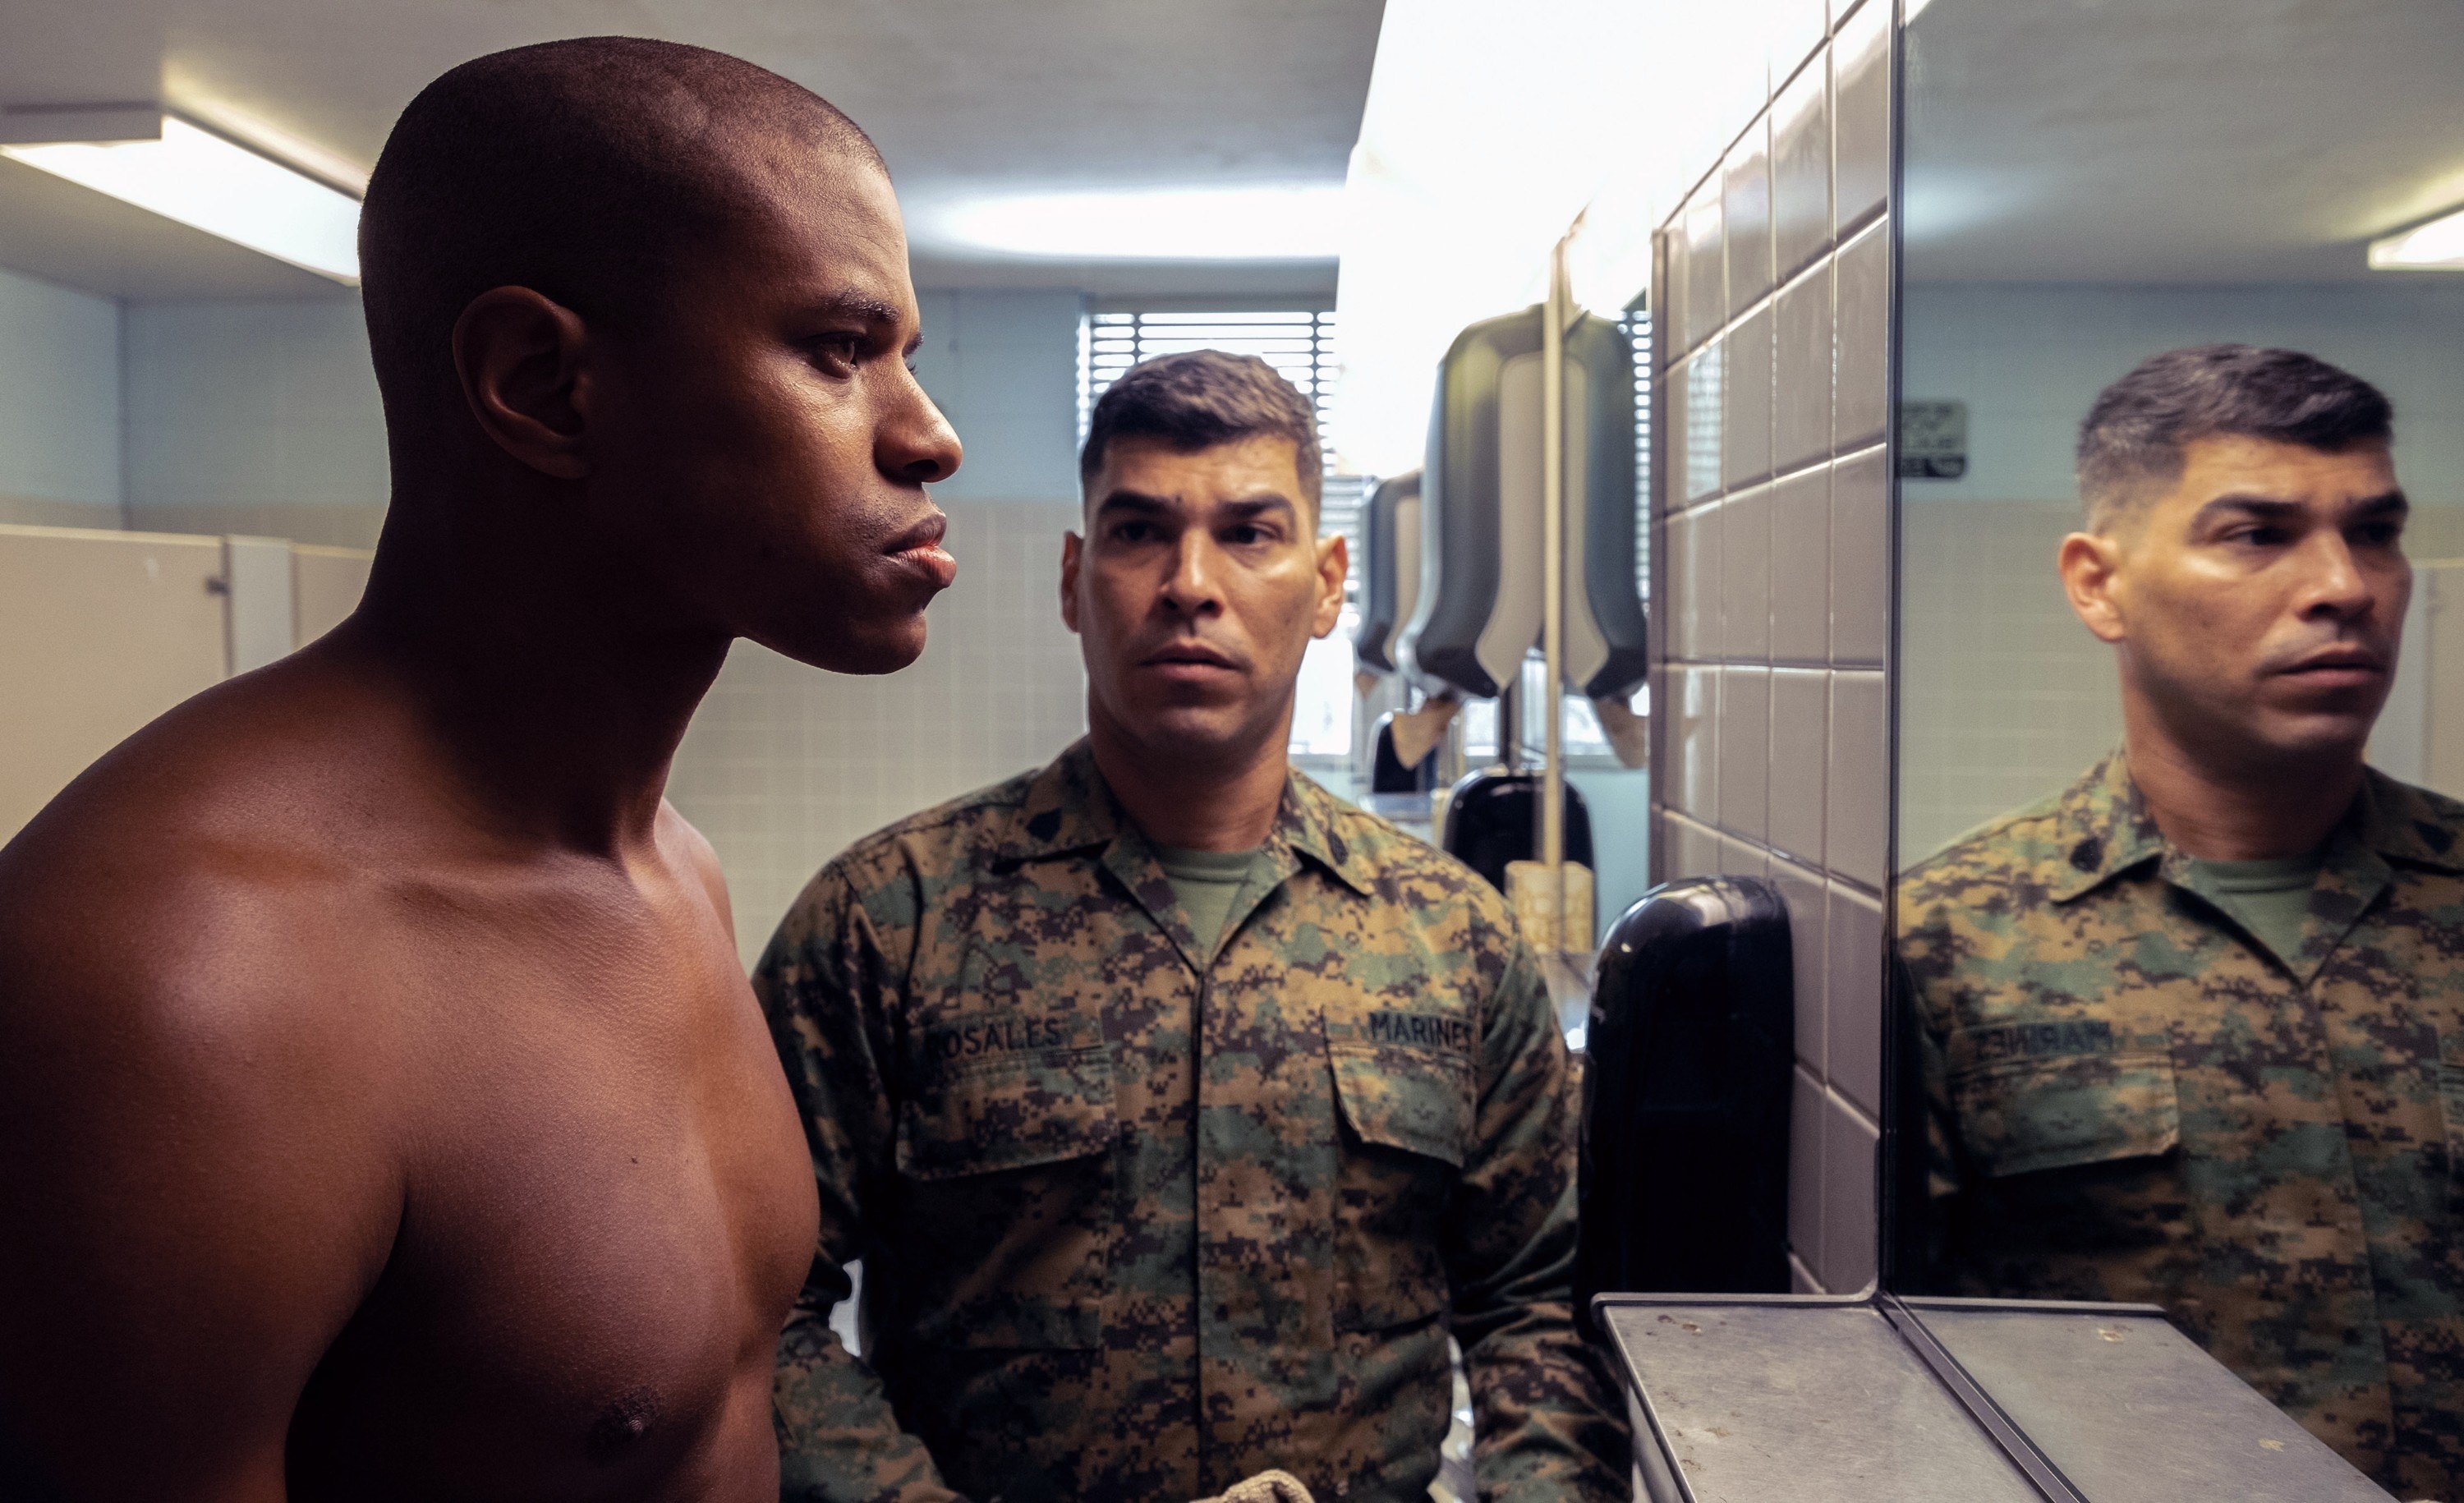 Jeremy looking in the mirror in a military scene